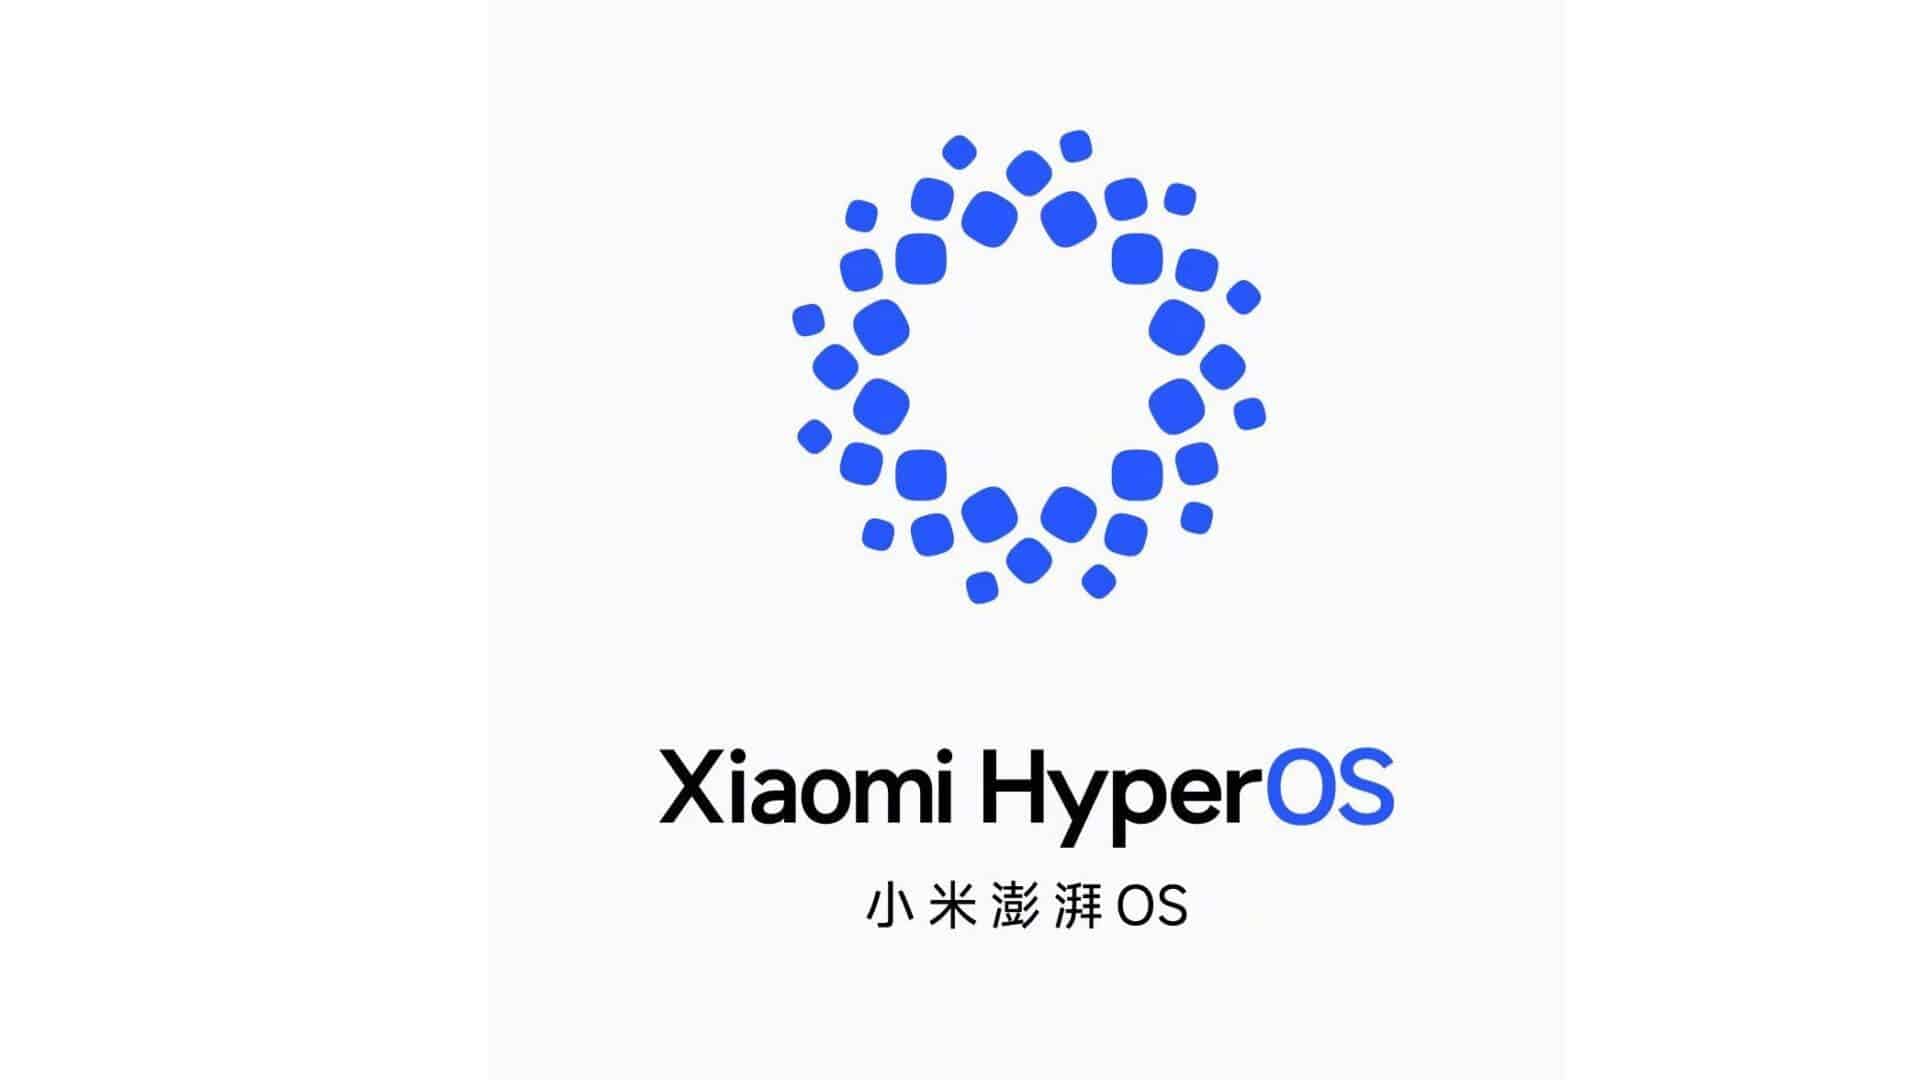 Xiaomi unveils HyperOS official logo with other details - Gizchina.com